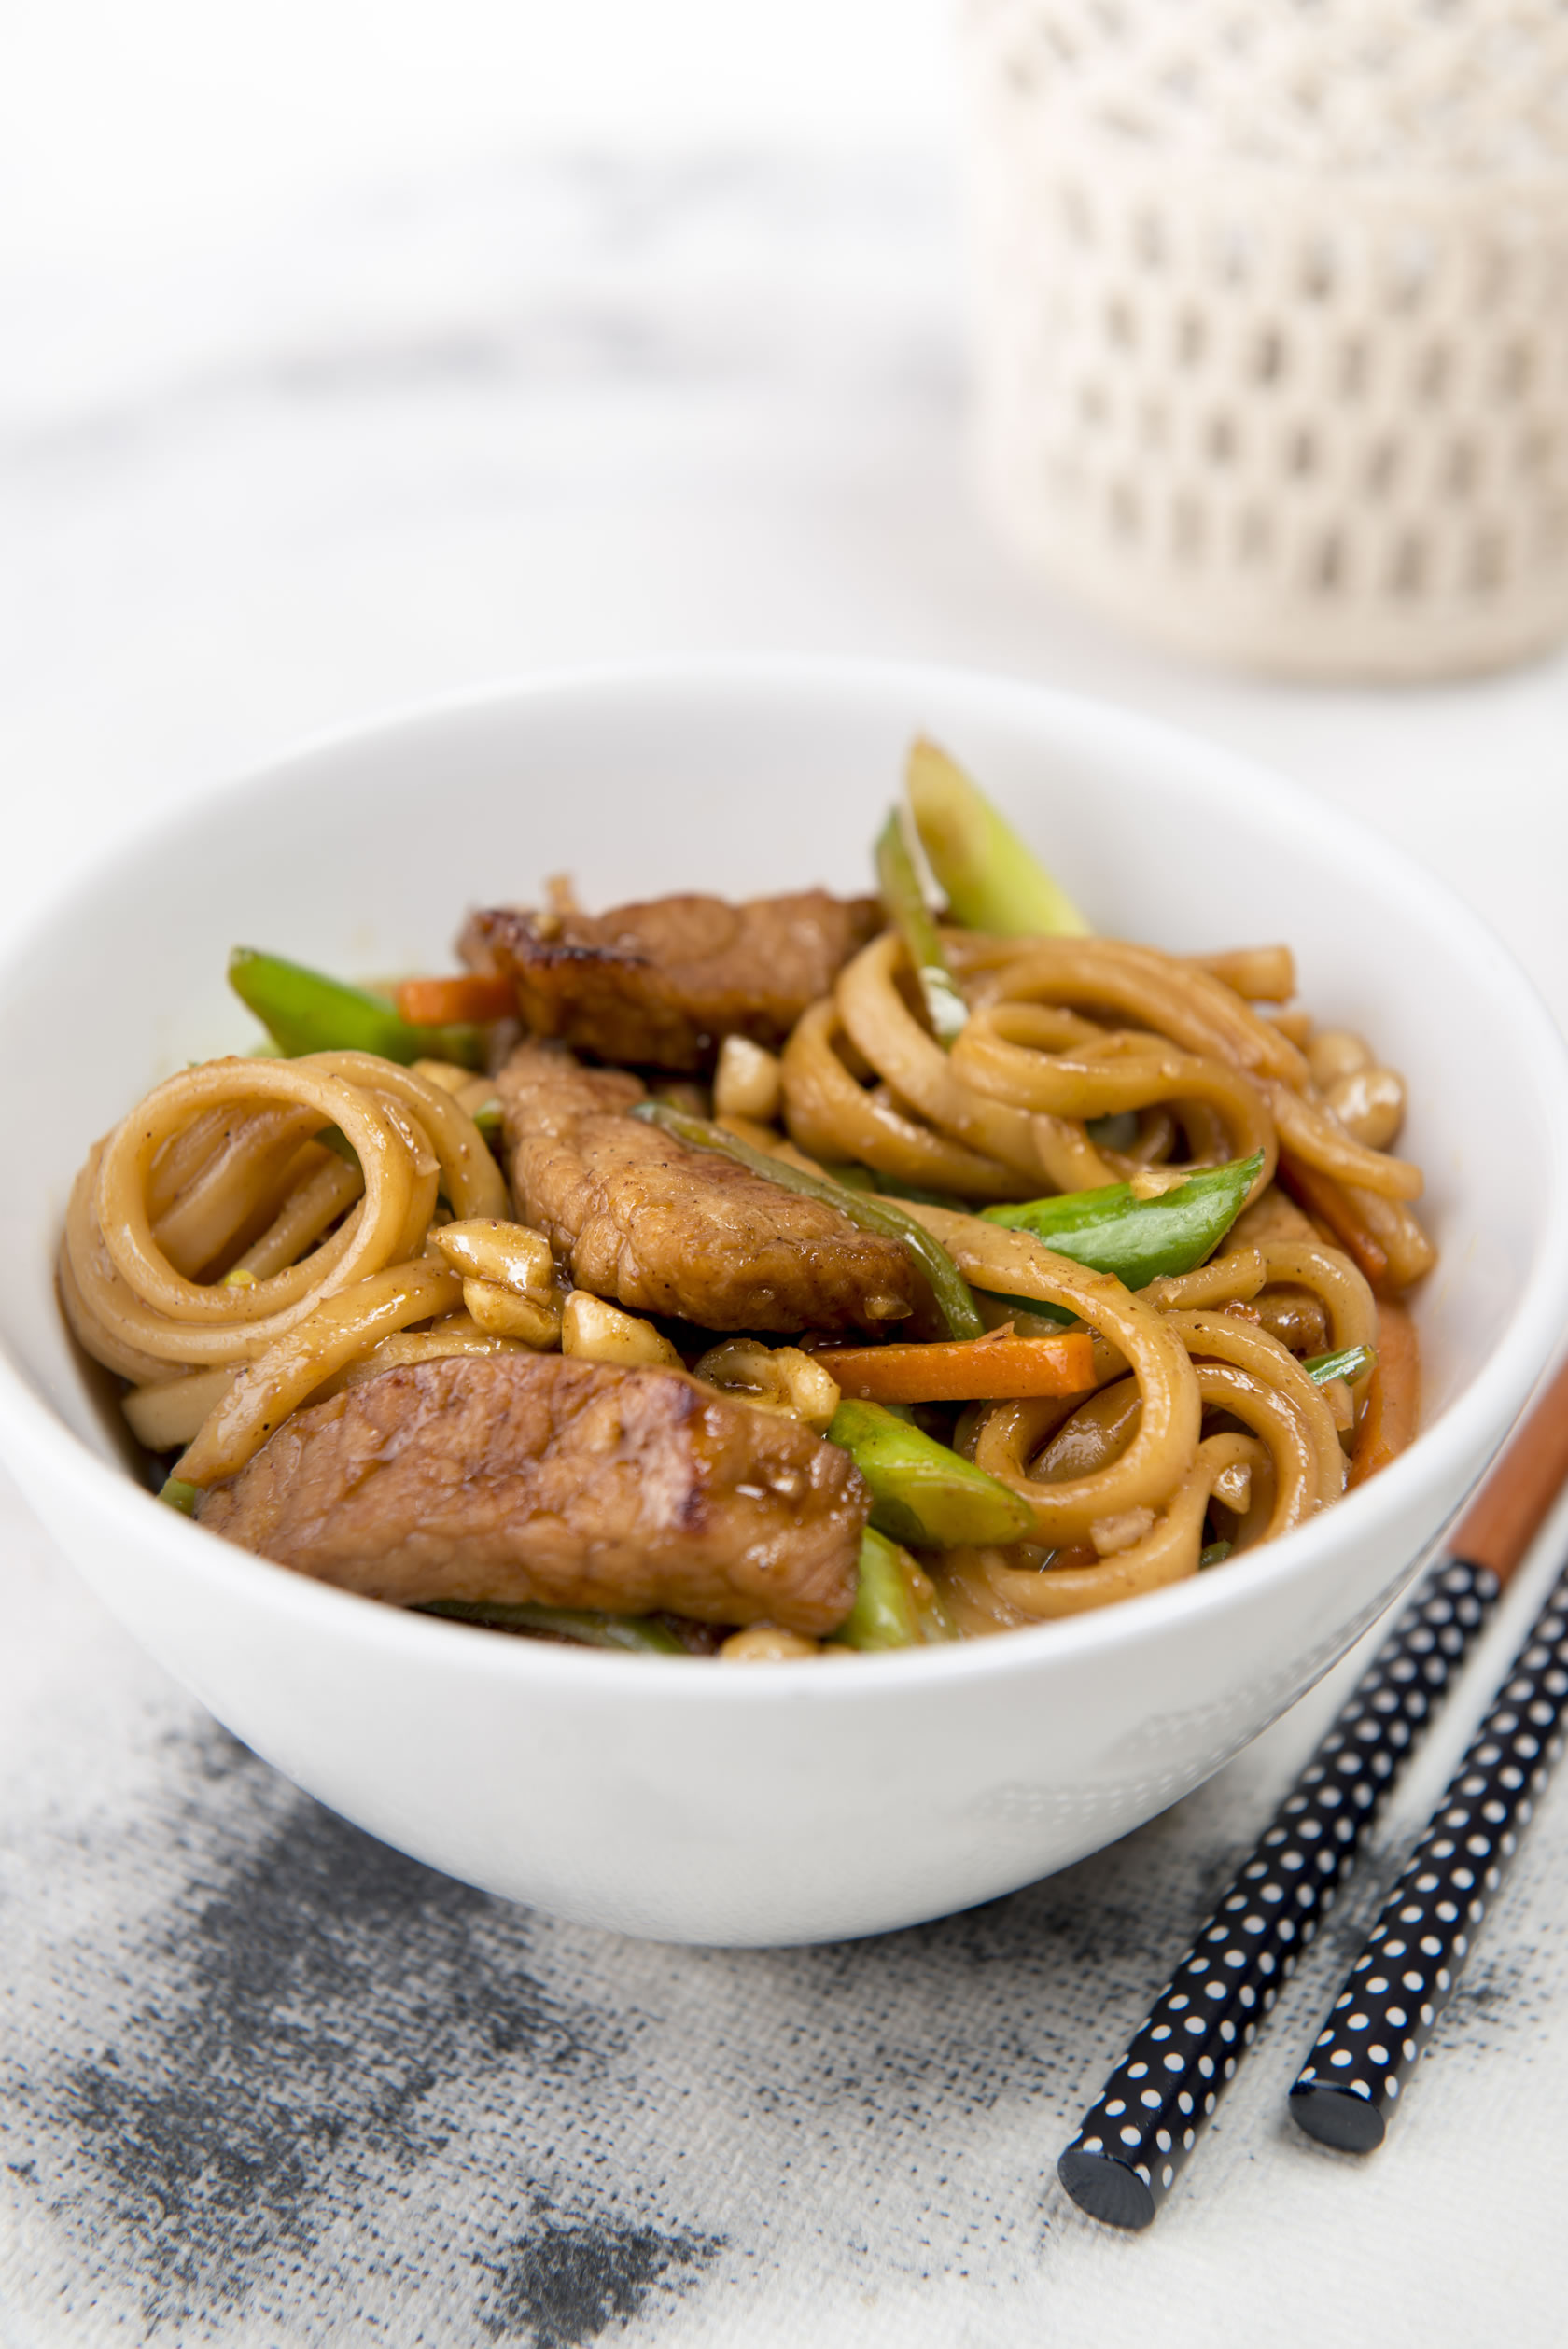 Sticky Pork and Vegetable Stir-fry with Udon Noodles